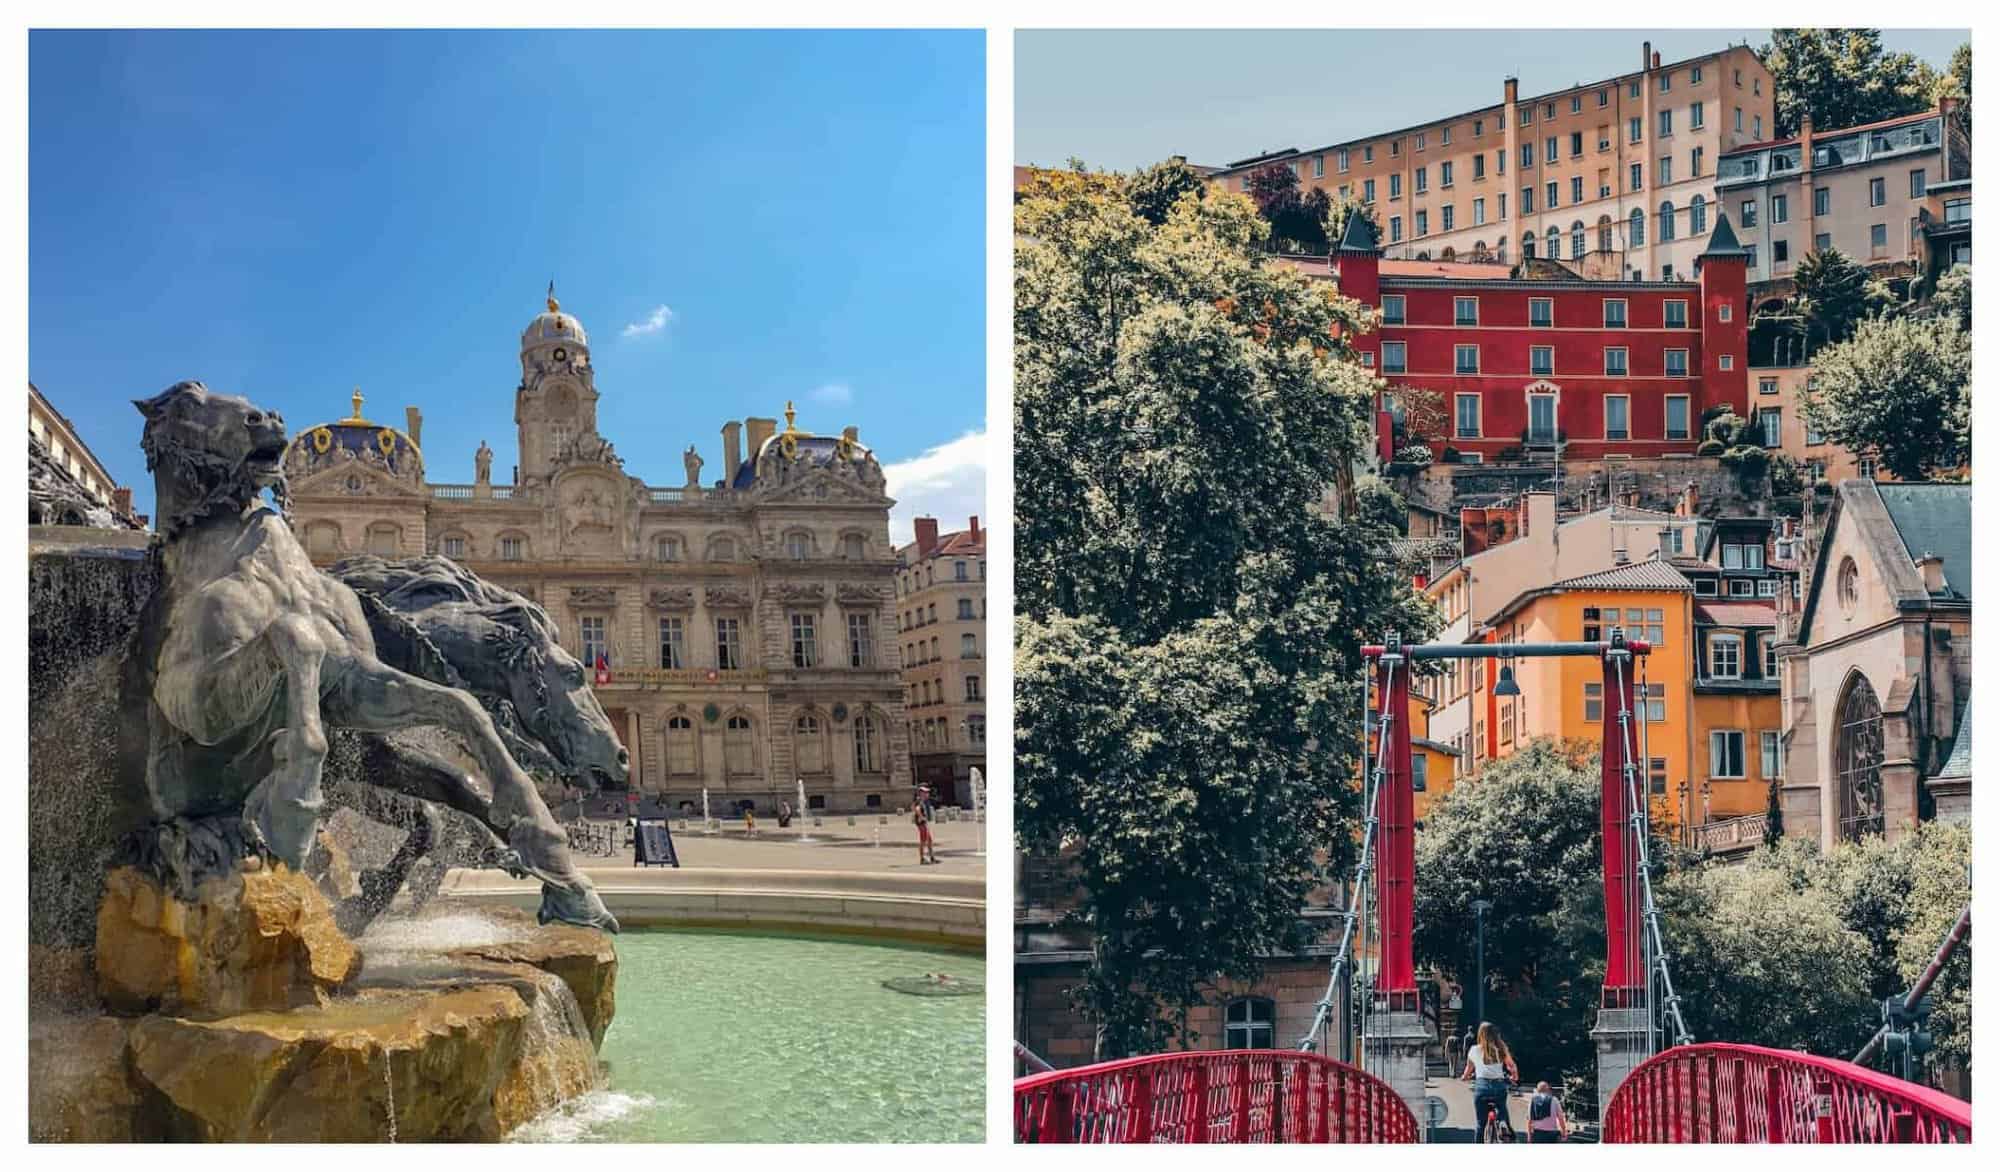 Left: A fountain with a horse statue. Right: A red bridge leads to a red building.